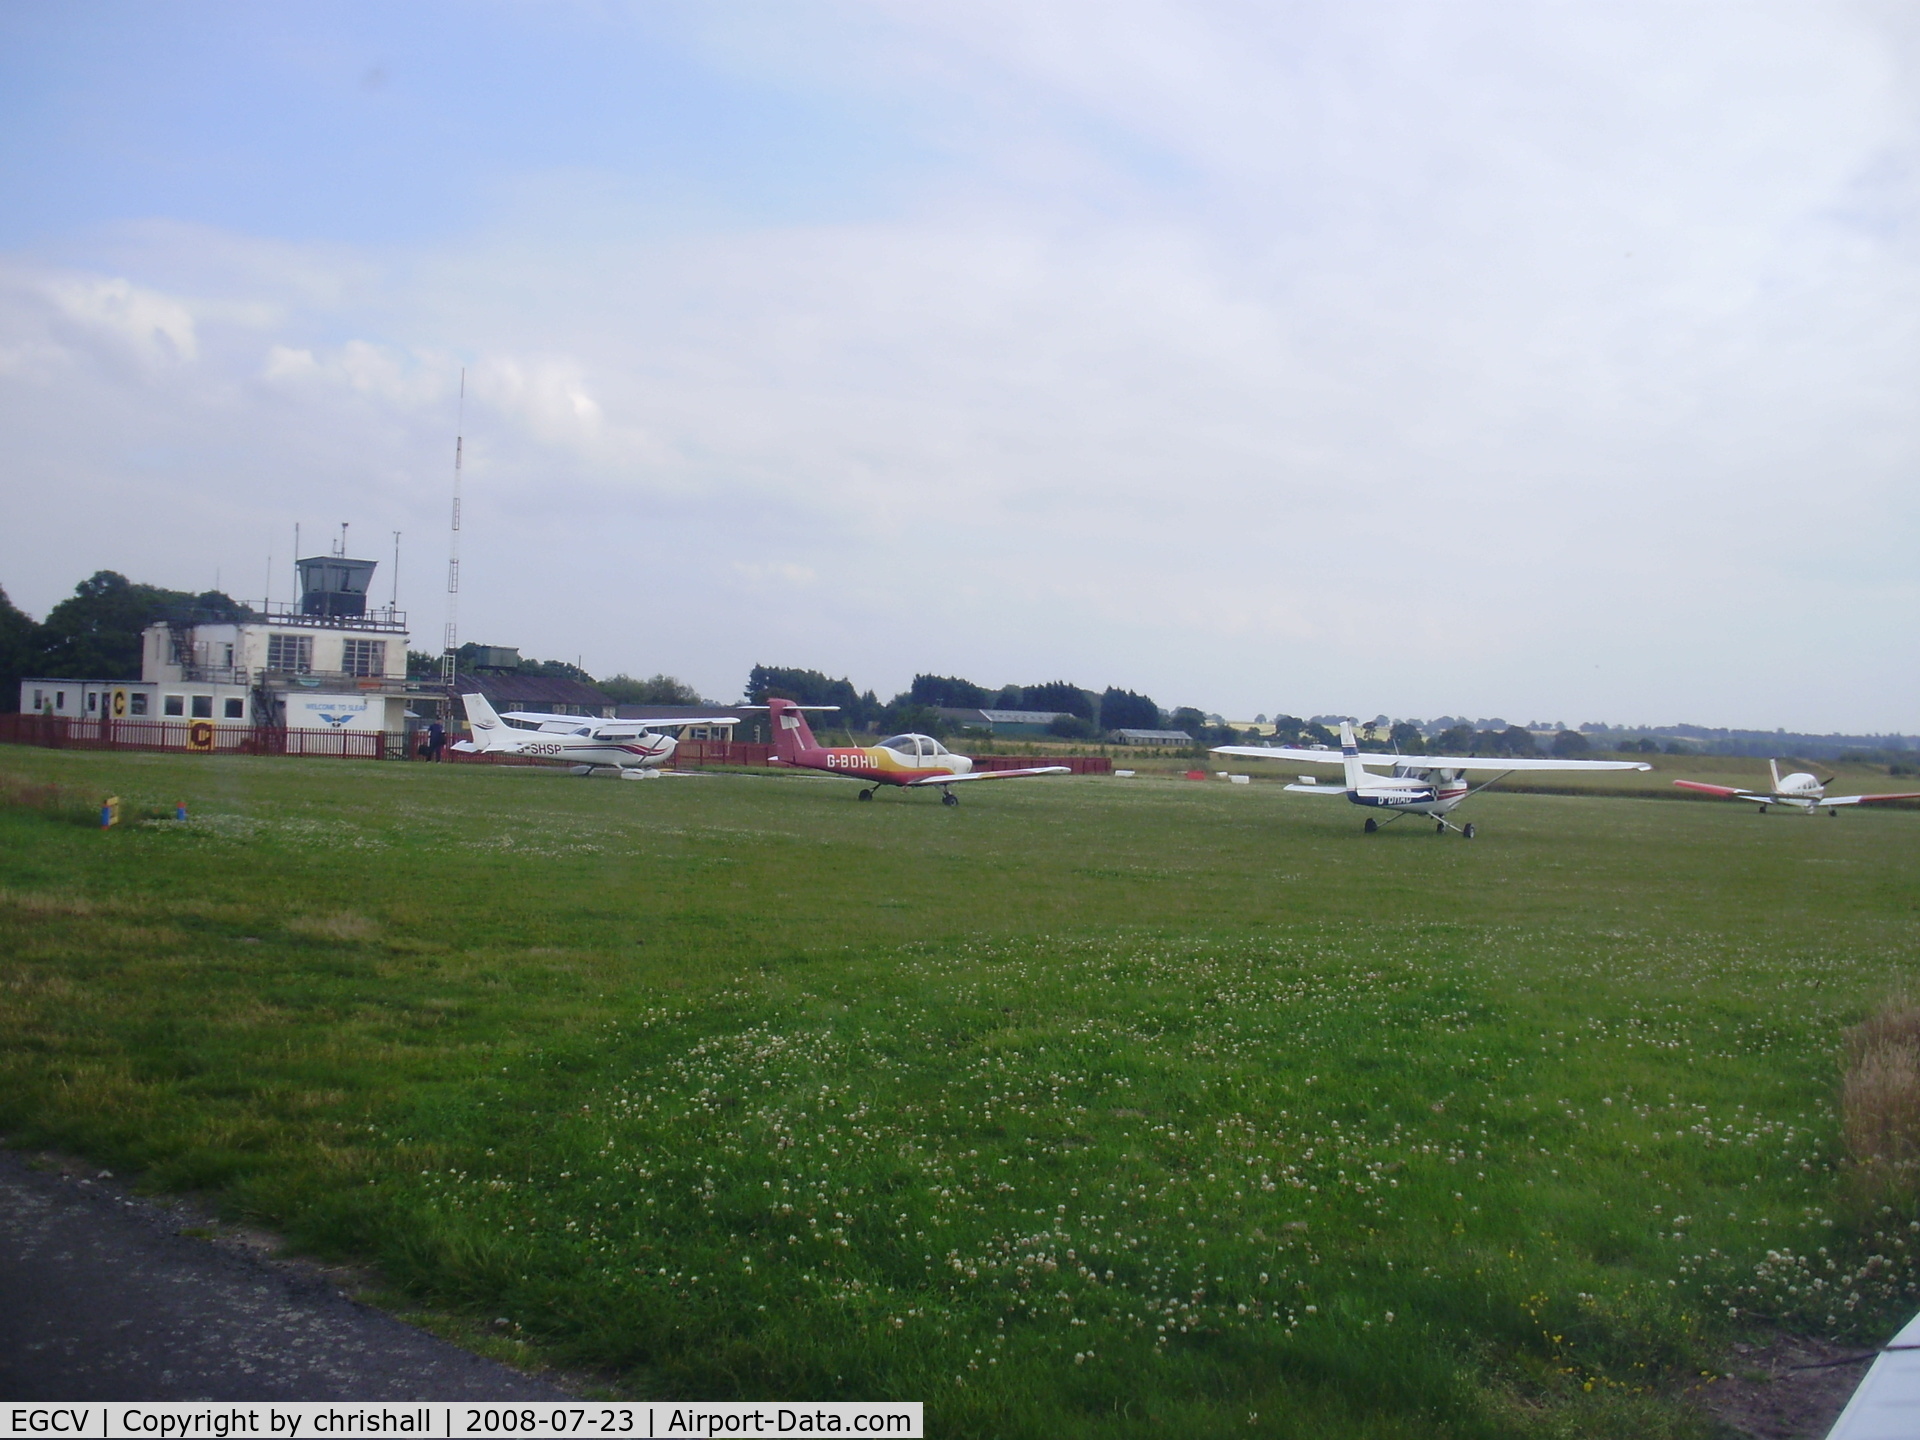 Sleap Airfield Airport, Shrewsbury, England United Kingdom (EGCV) - taxing out from Sleap